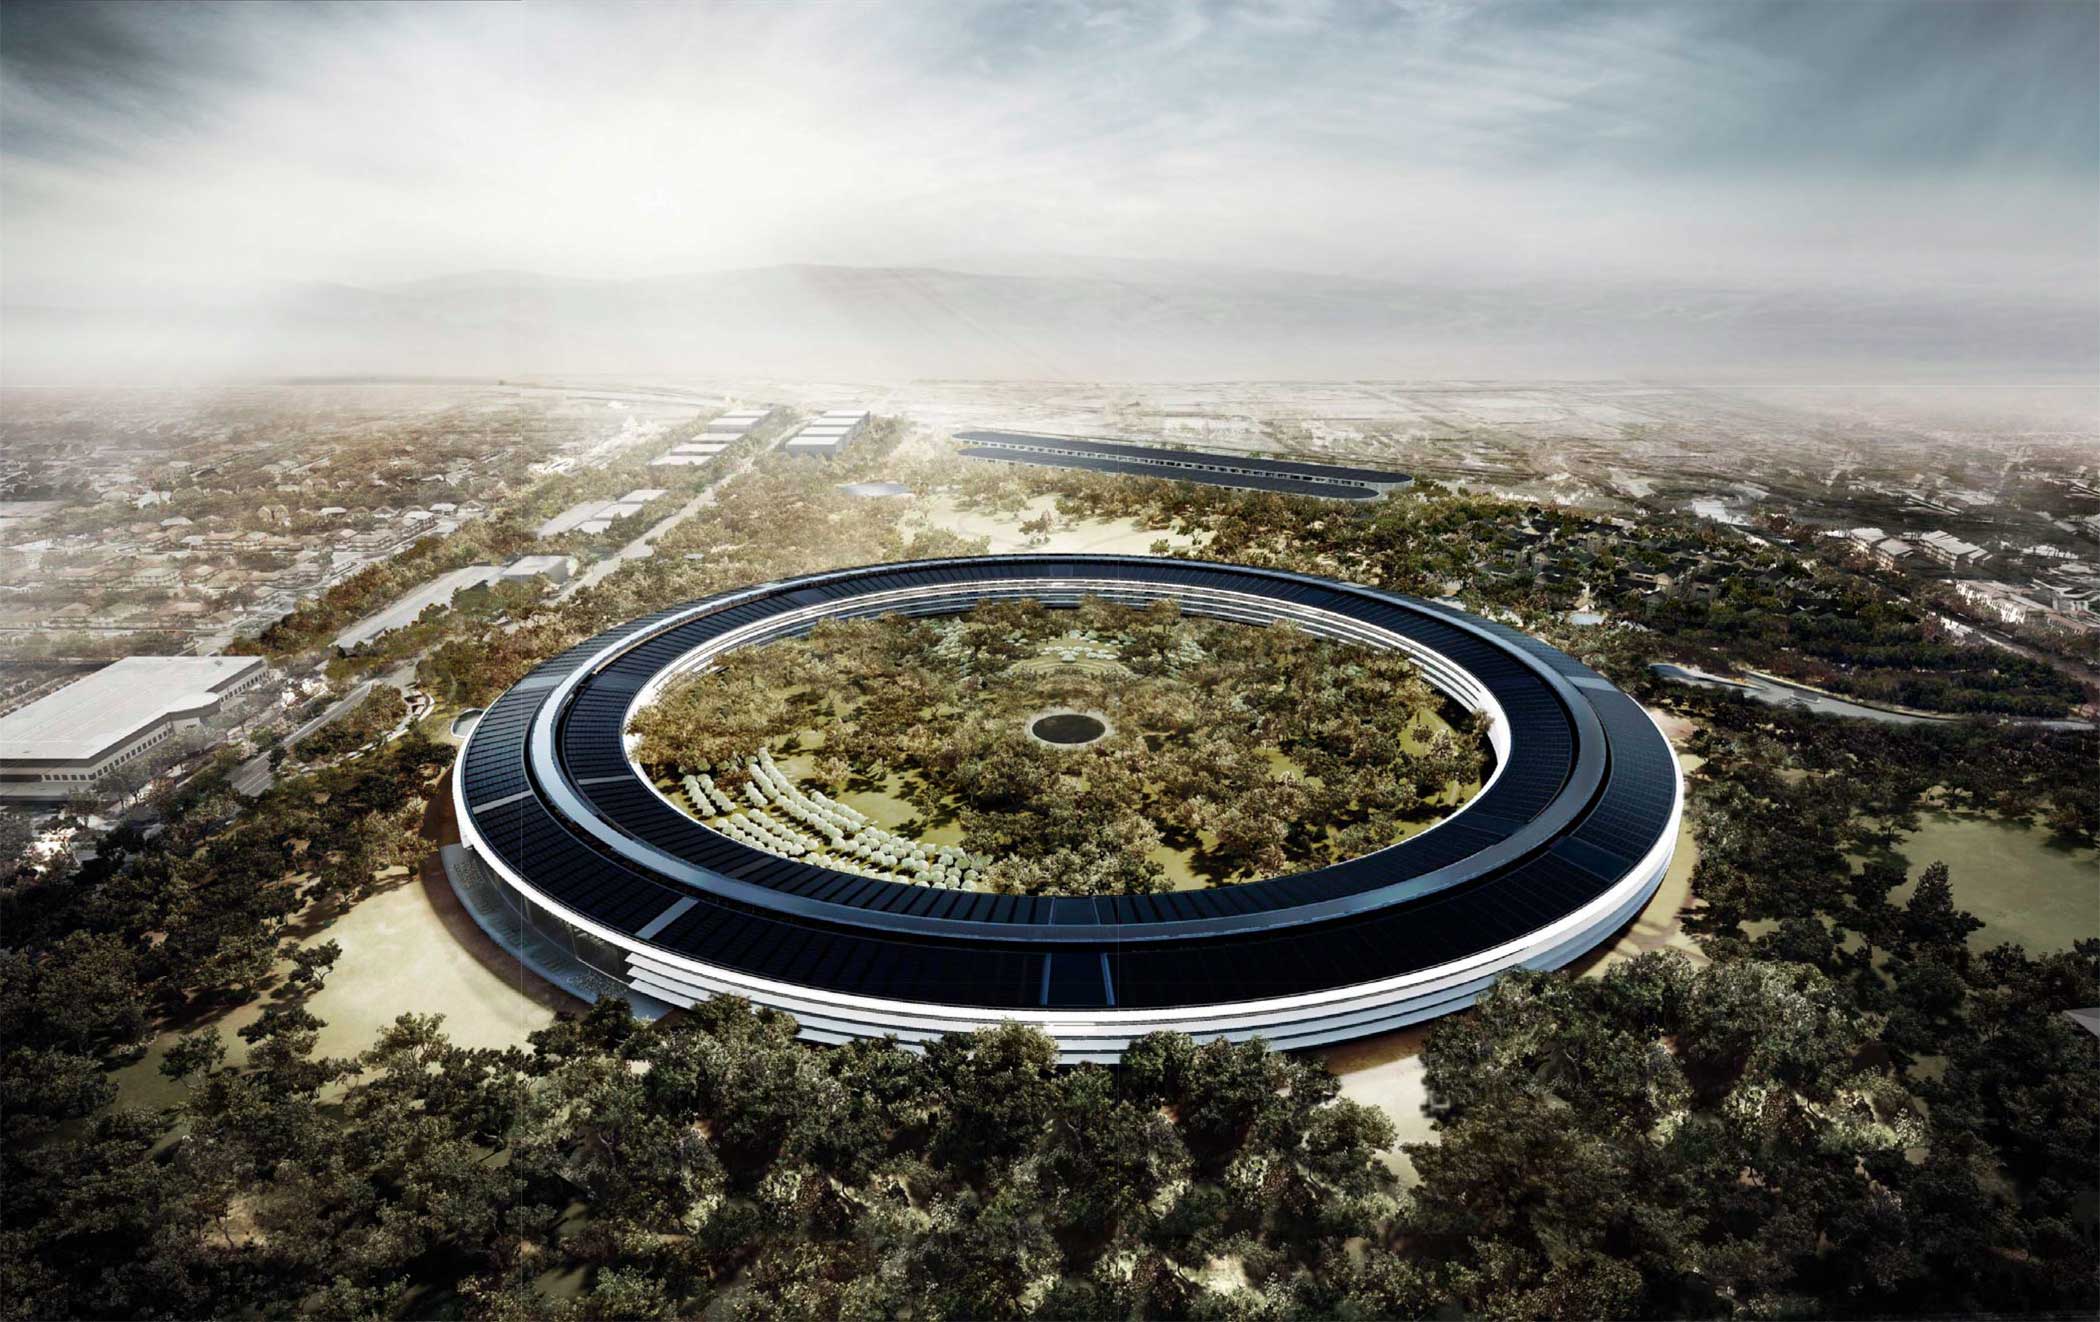 Apple Cupertino, Calif., The four-story circular building, to be completed in 2016 is designed to house some 12,000 employees.